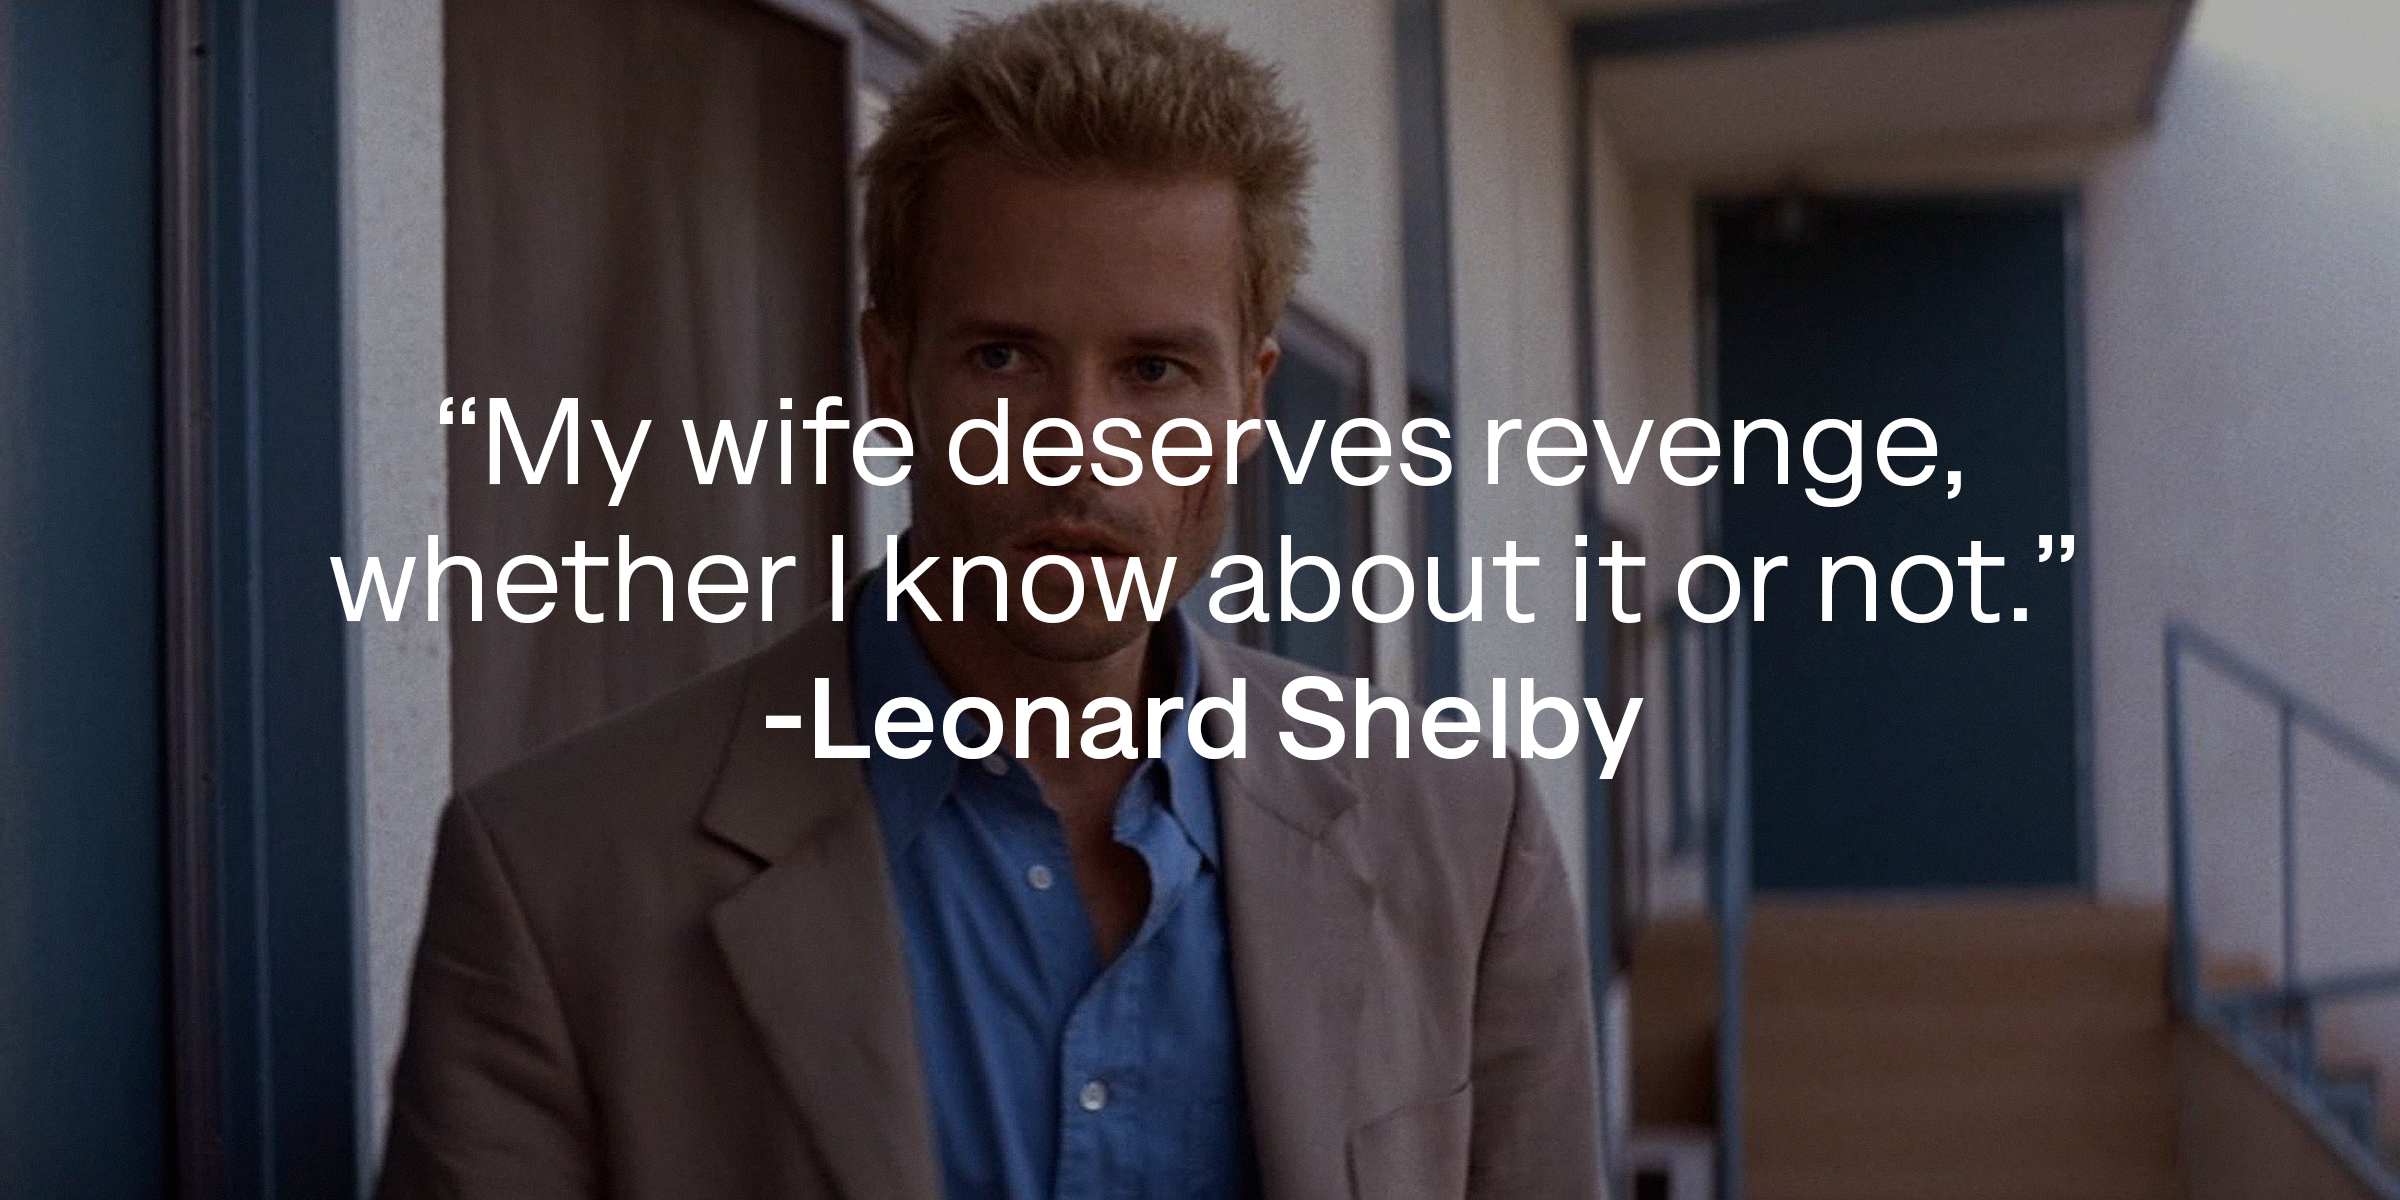 Leonard Shelby with his quote: "My wife deserves revenge whether I know about it or not." | Source: facebook.com/MementoOfficial